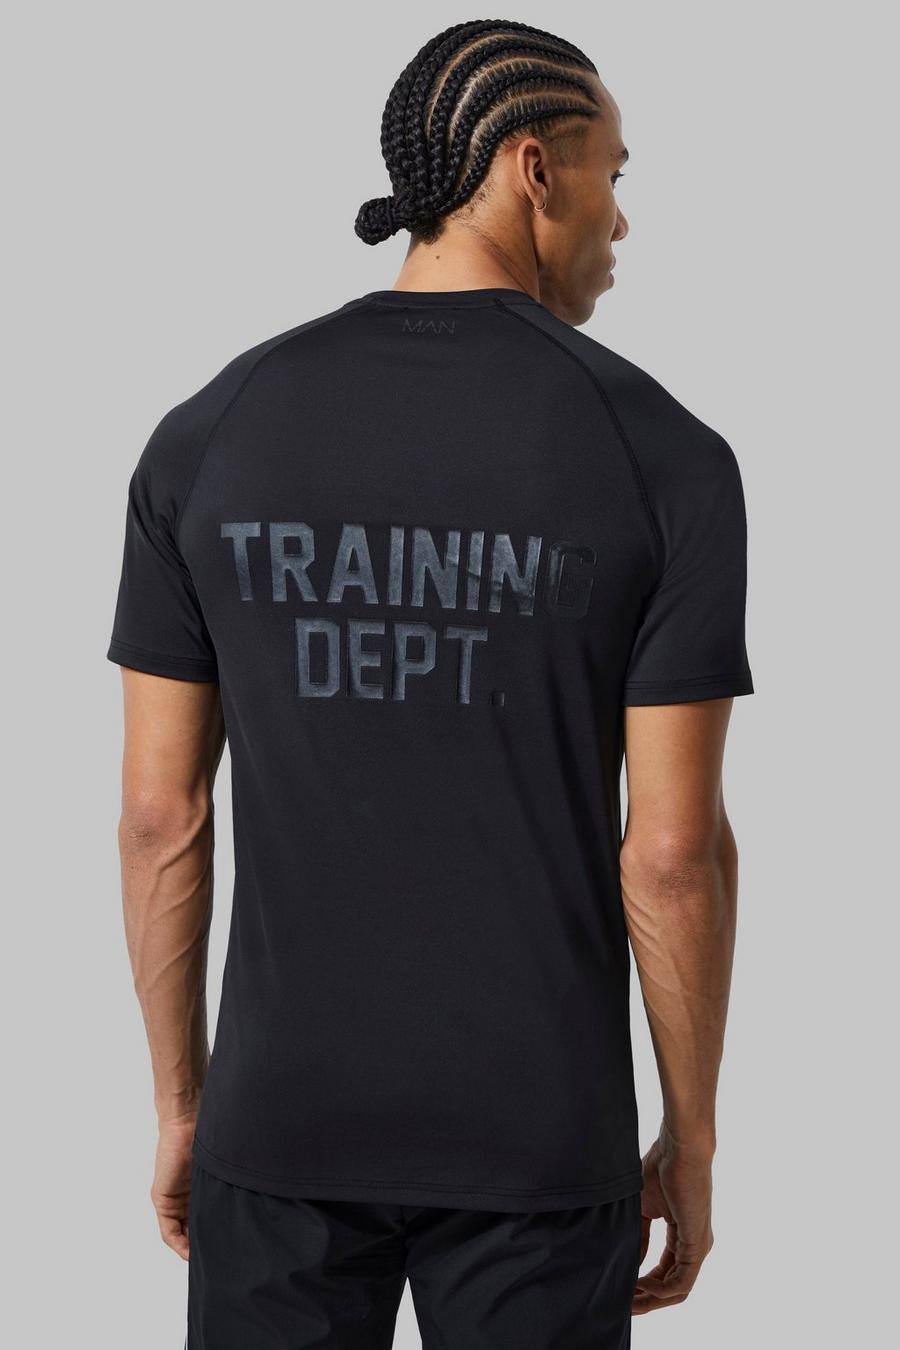 Tall Muscle-Fit Trainings Dept Muscle-Fit T-Shirt, Black image number 1